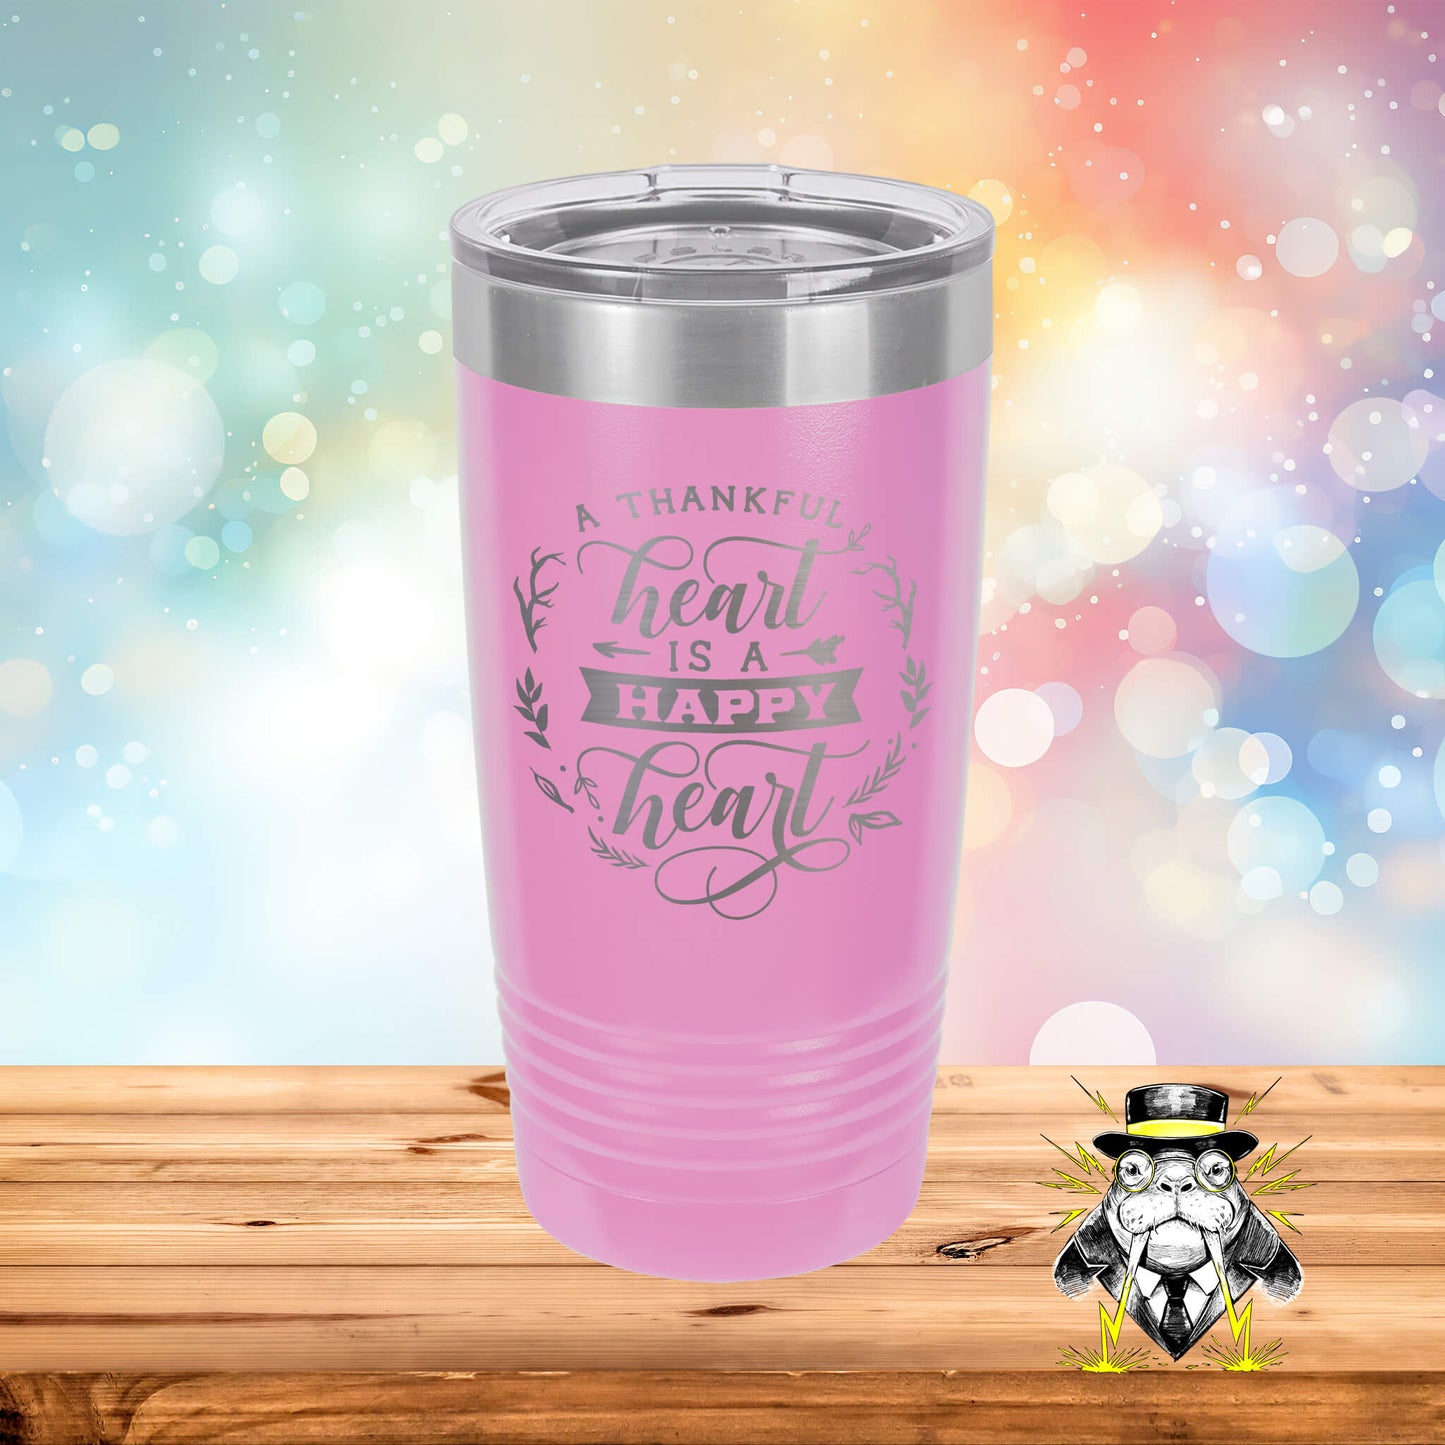 A Thankful Heart is a Happy Heart Engraved Tumbler